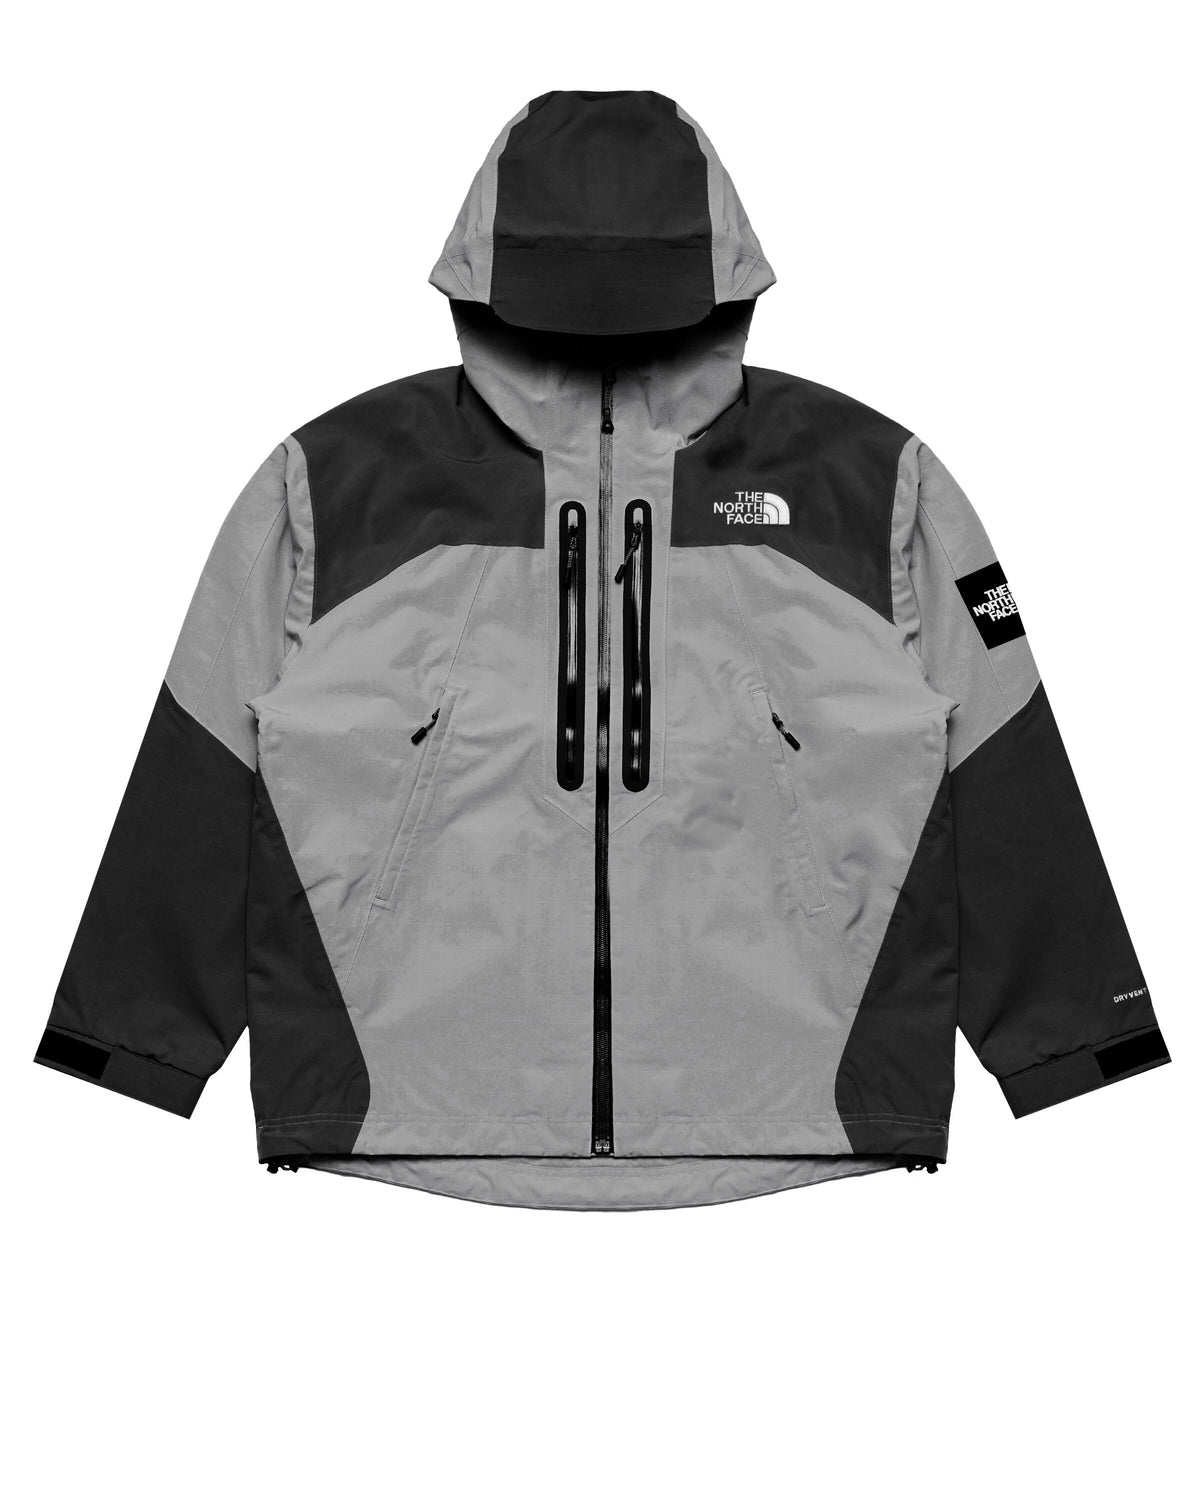 The North Face TRANSVERSE 2L DRYVENT JACKET